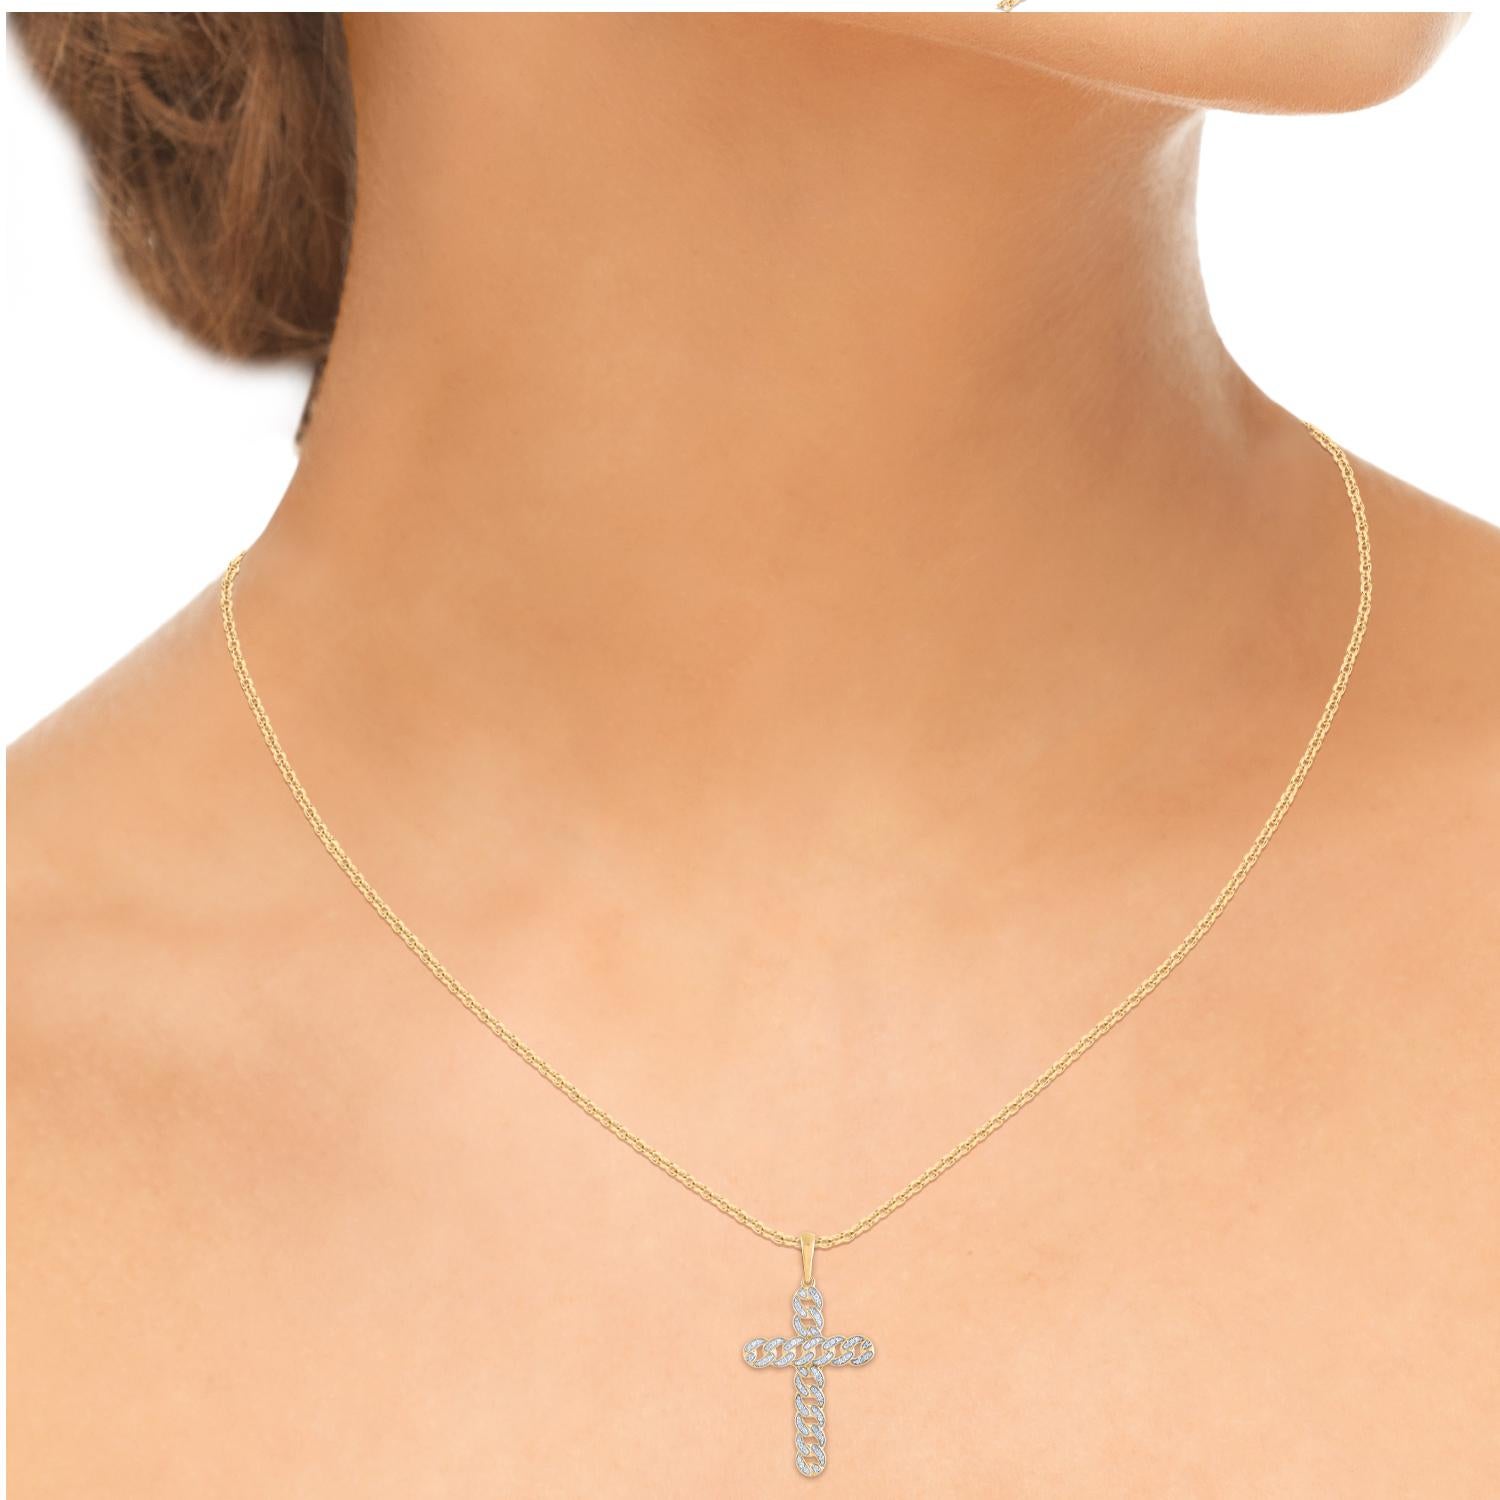 TJD 0.20 Carat Round Cut Diamond Cross Pendant Necklace in 18KT Yellow Gold In New Condition For Sale In New York, NY